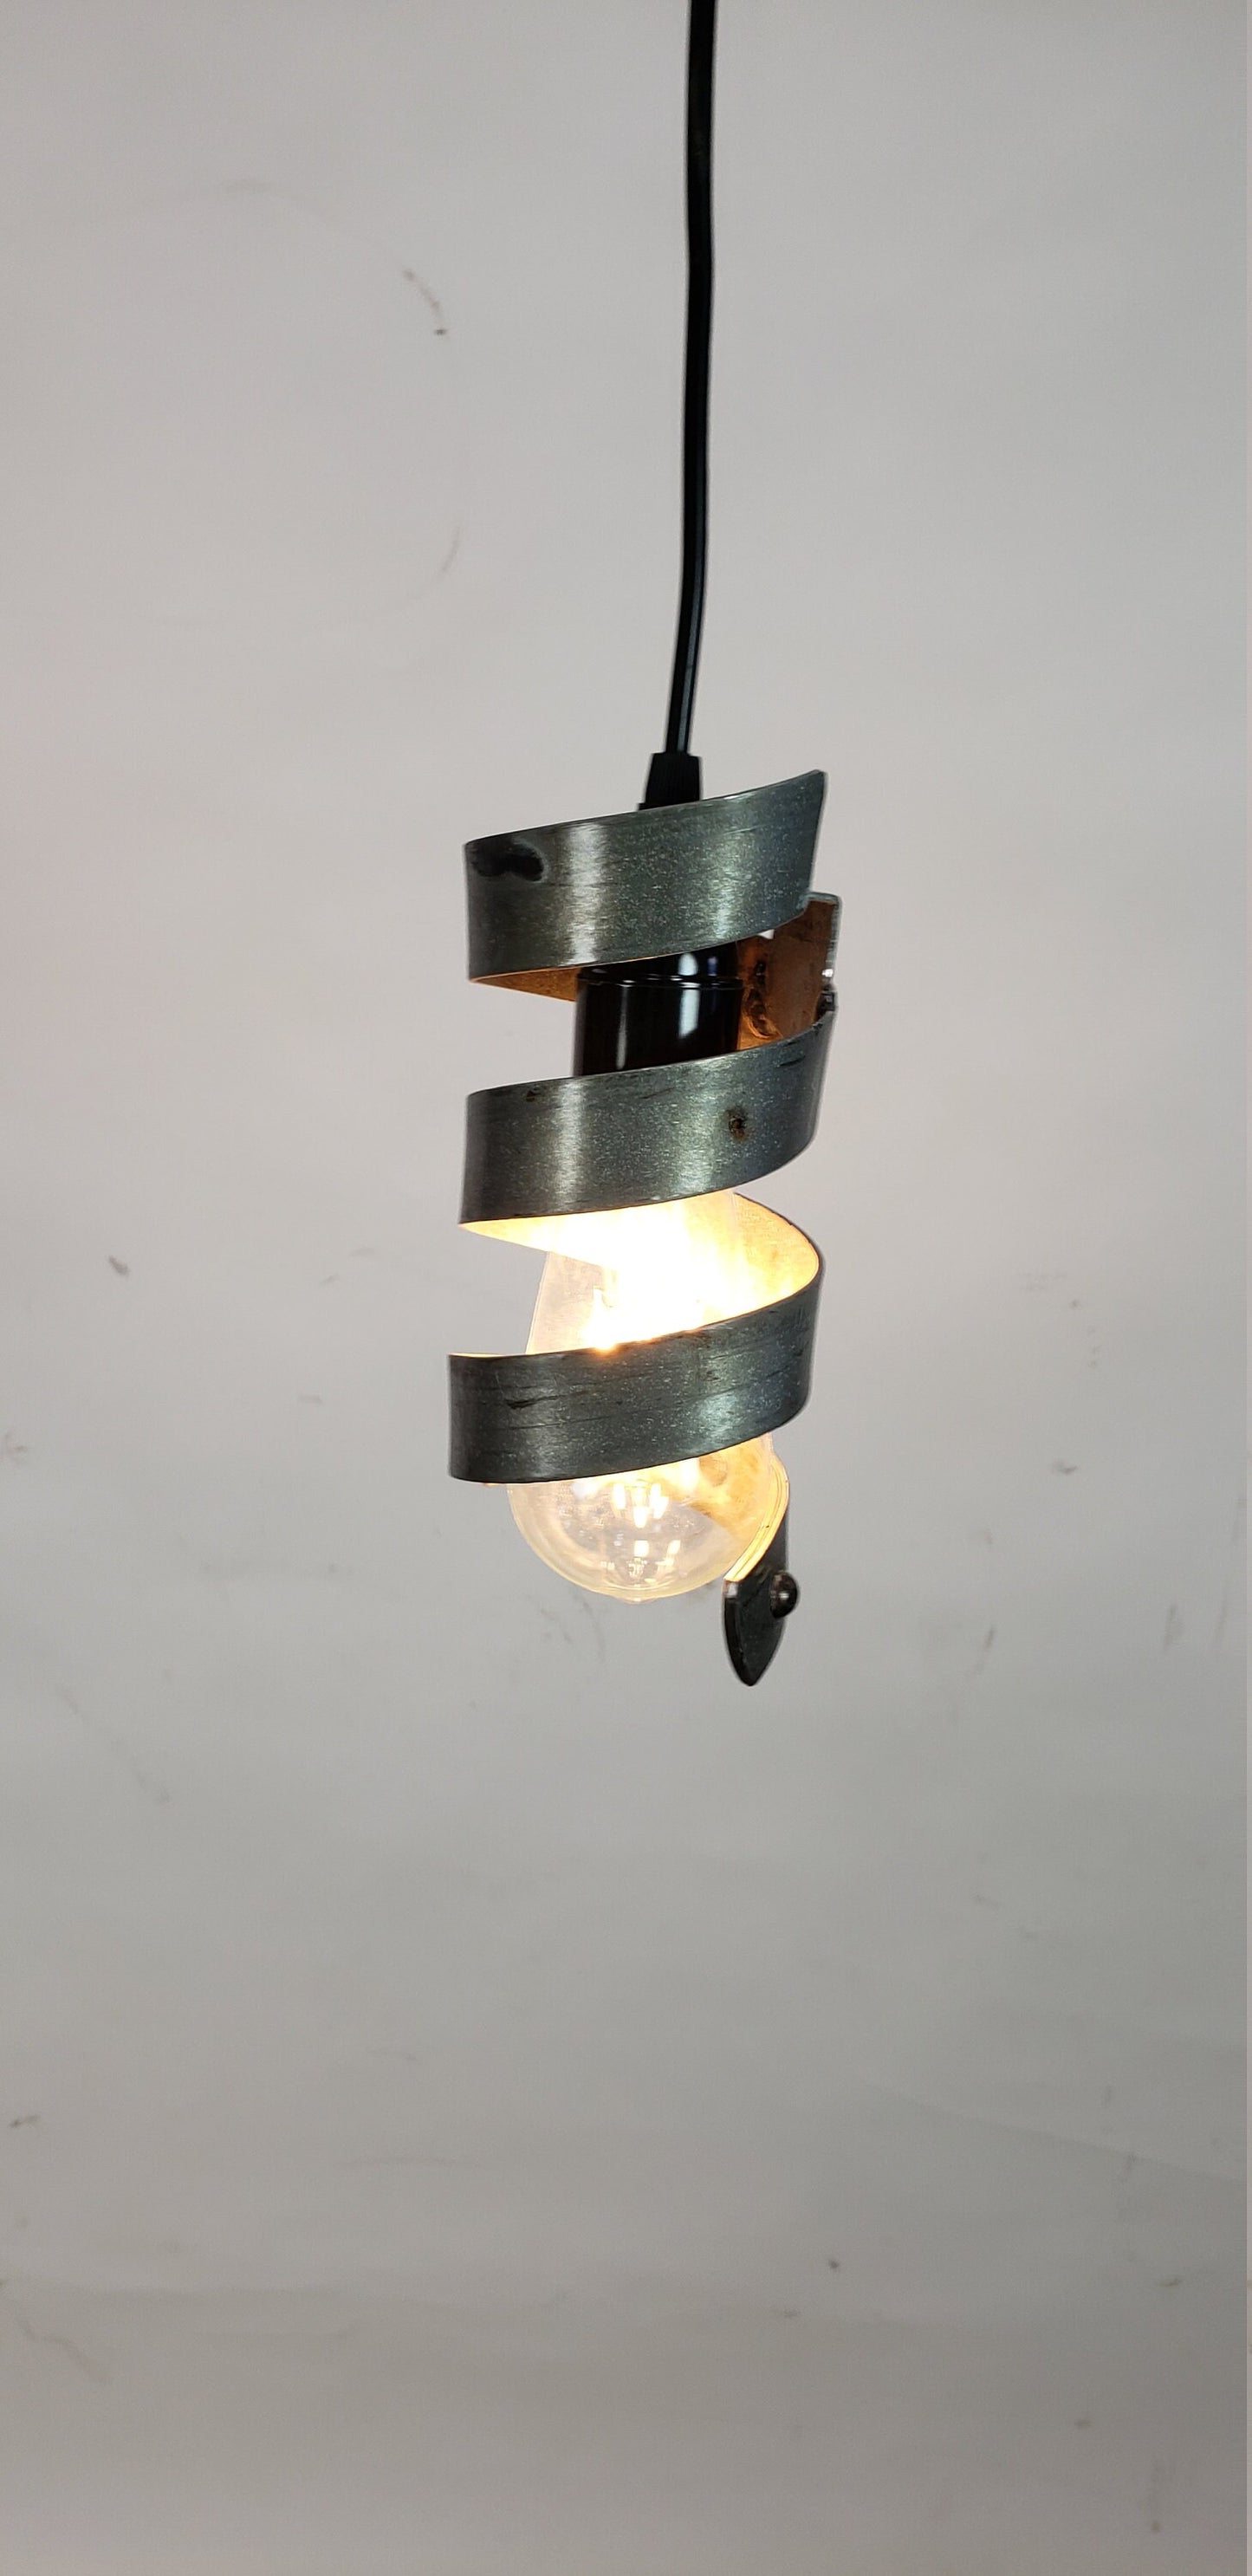 Wine Barrel Ring Pendant Light - Vima - Made from Retired California wine barrel rings. 100% Recycled!